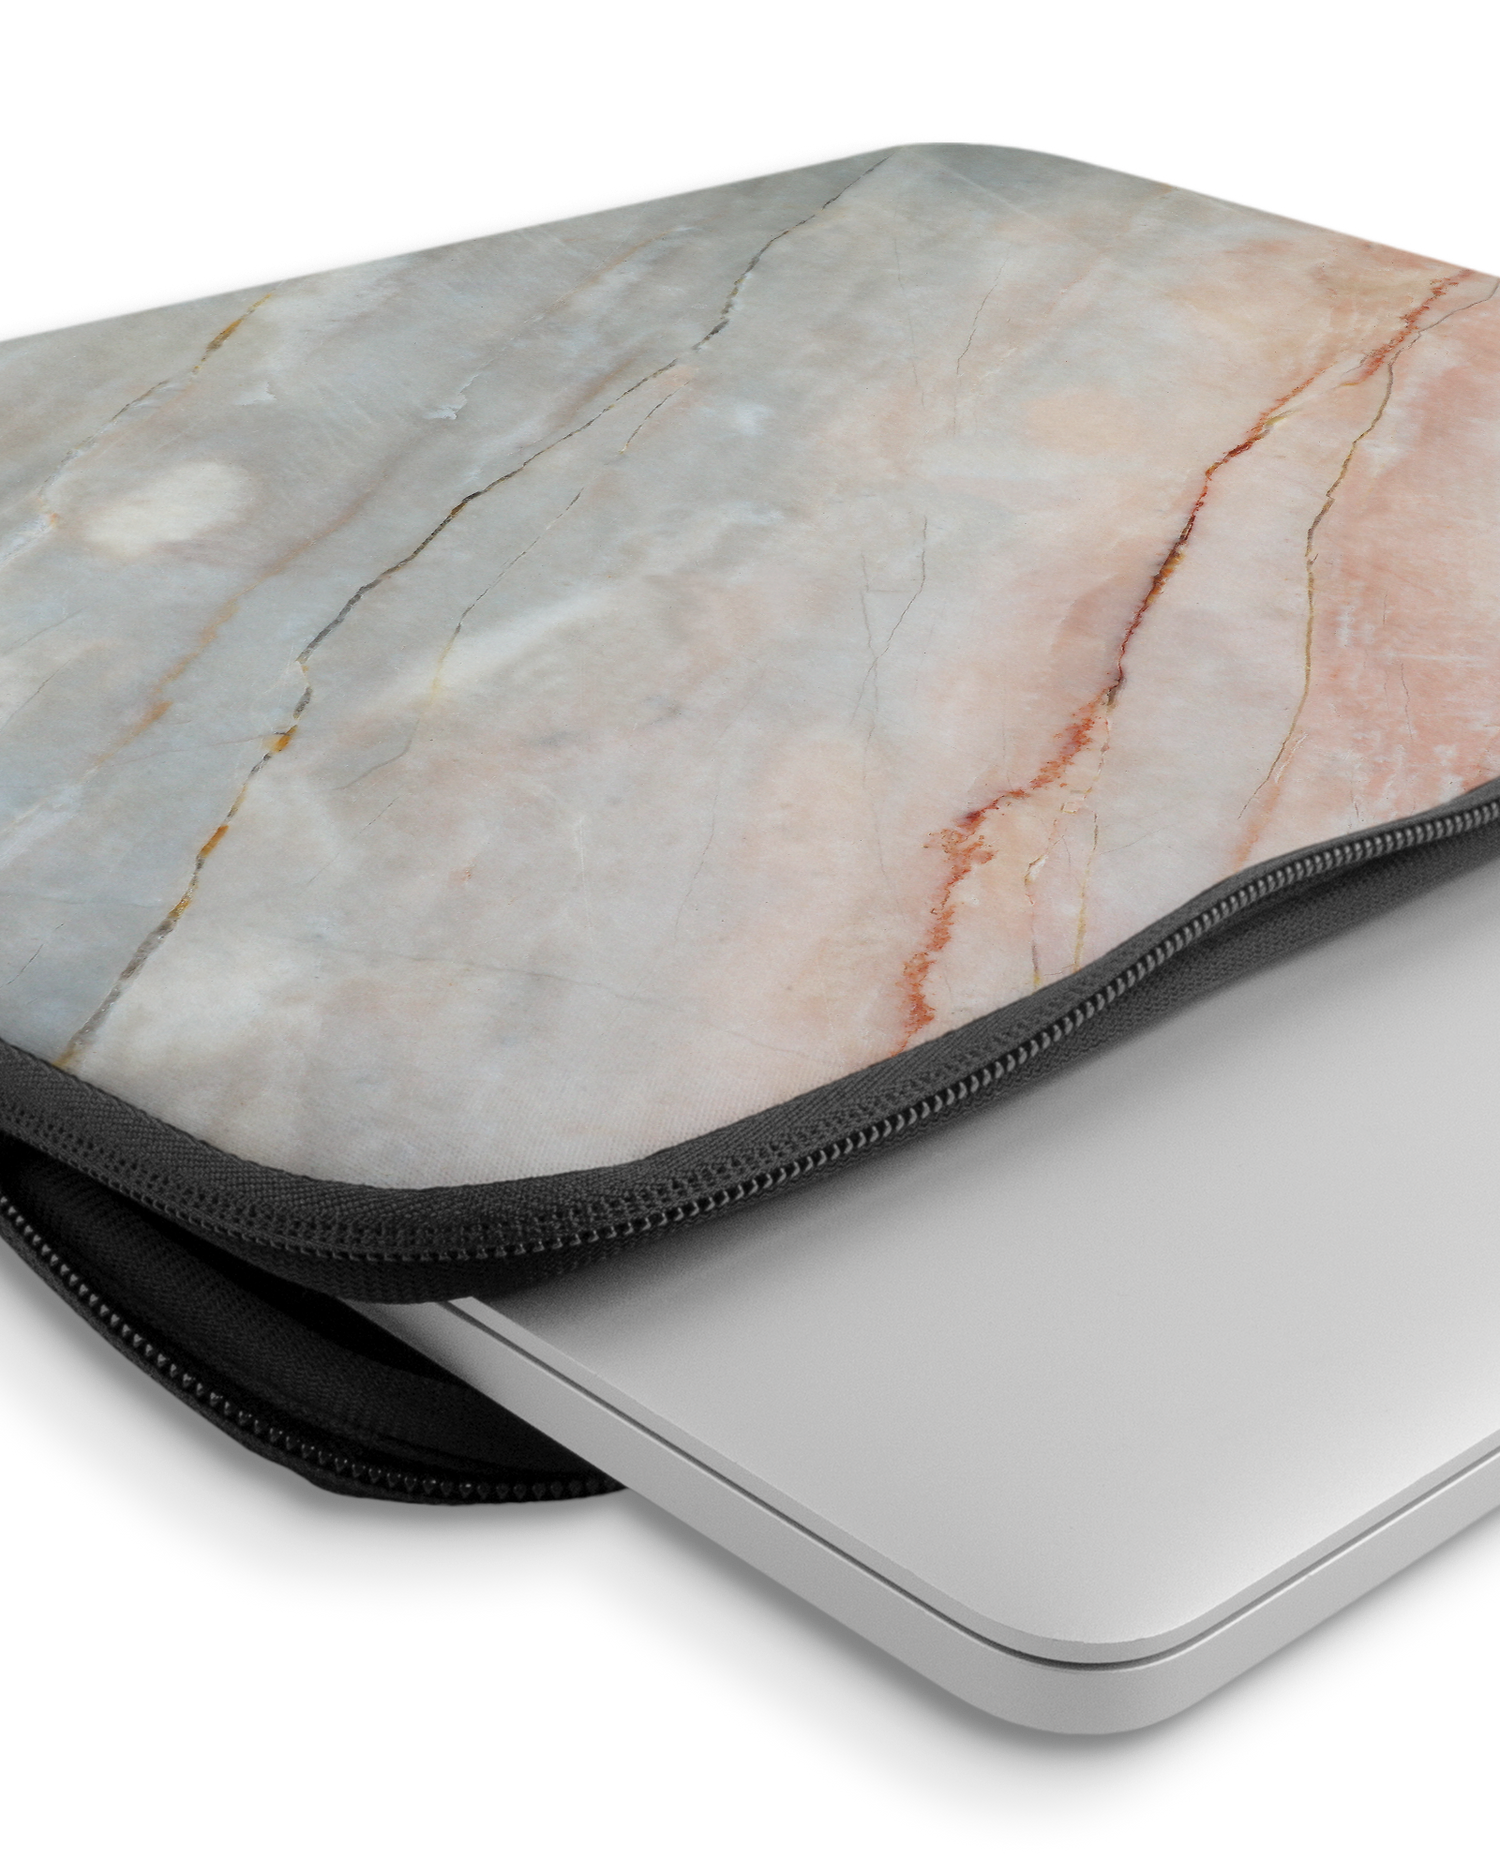 Mother of Pearl Marble Laptop Case 14-15 inch with device inside